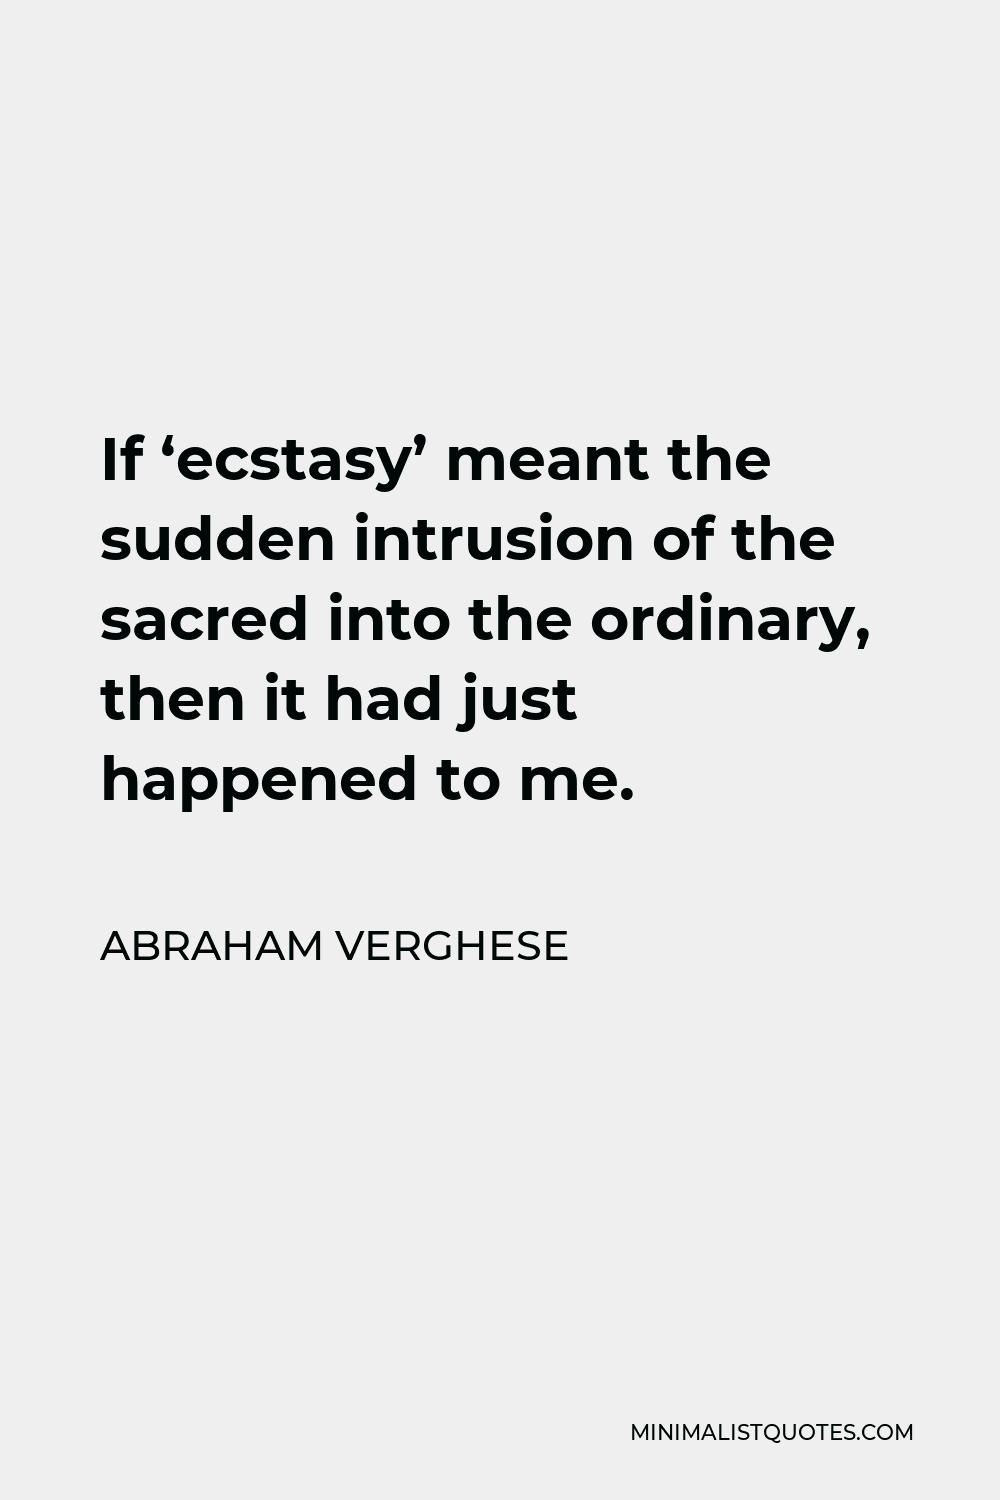 Abraham Verghese Quote - If ‘ecstasy’ meant the sudden intrusion of the sacred into the ordinary, then it had just happened to me.